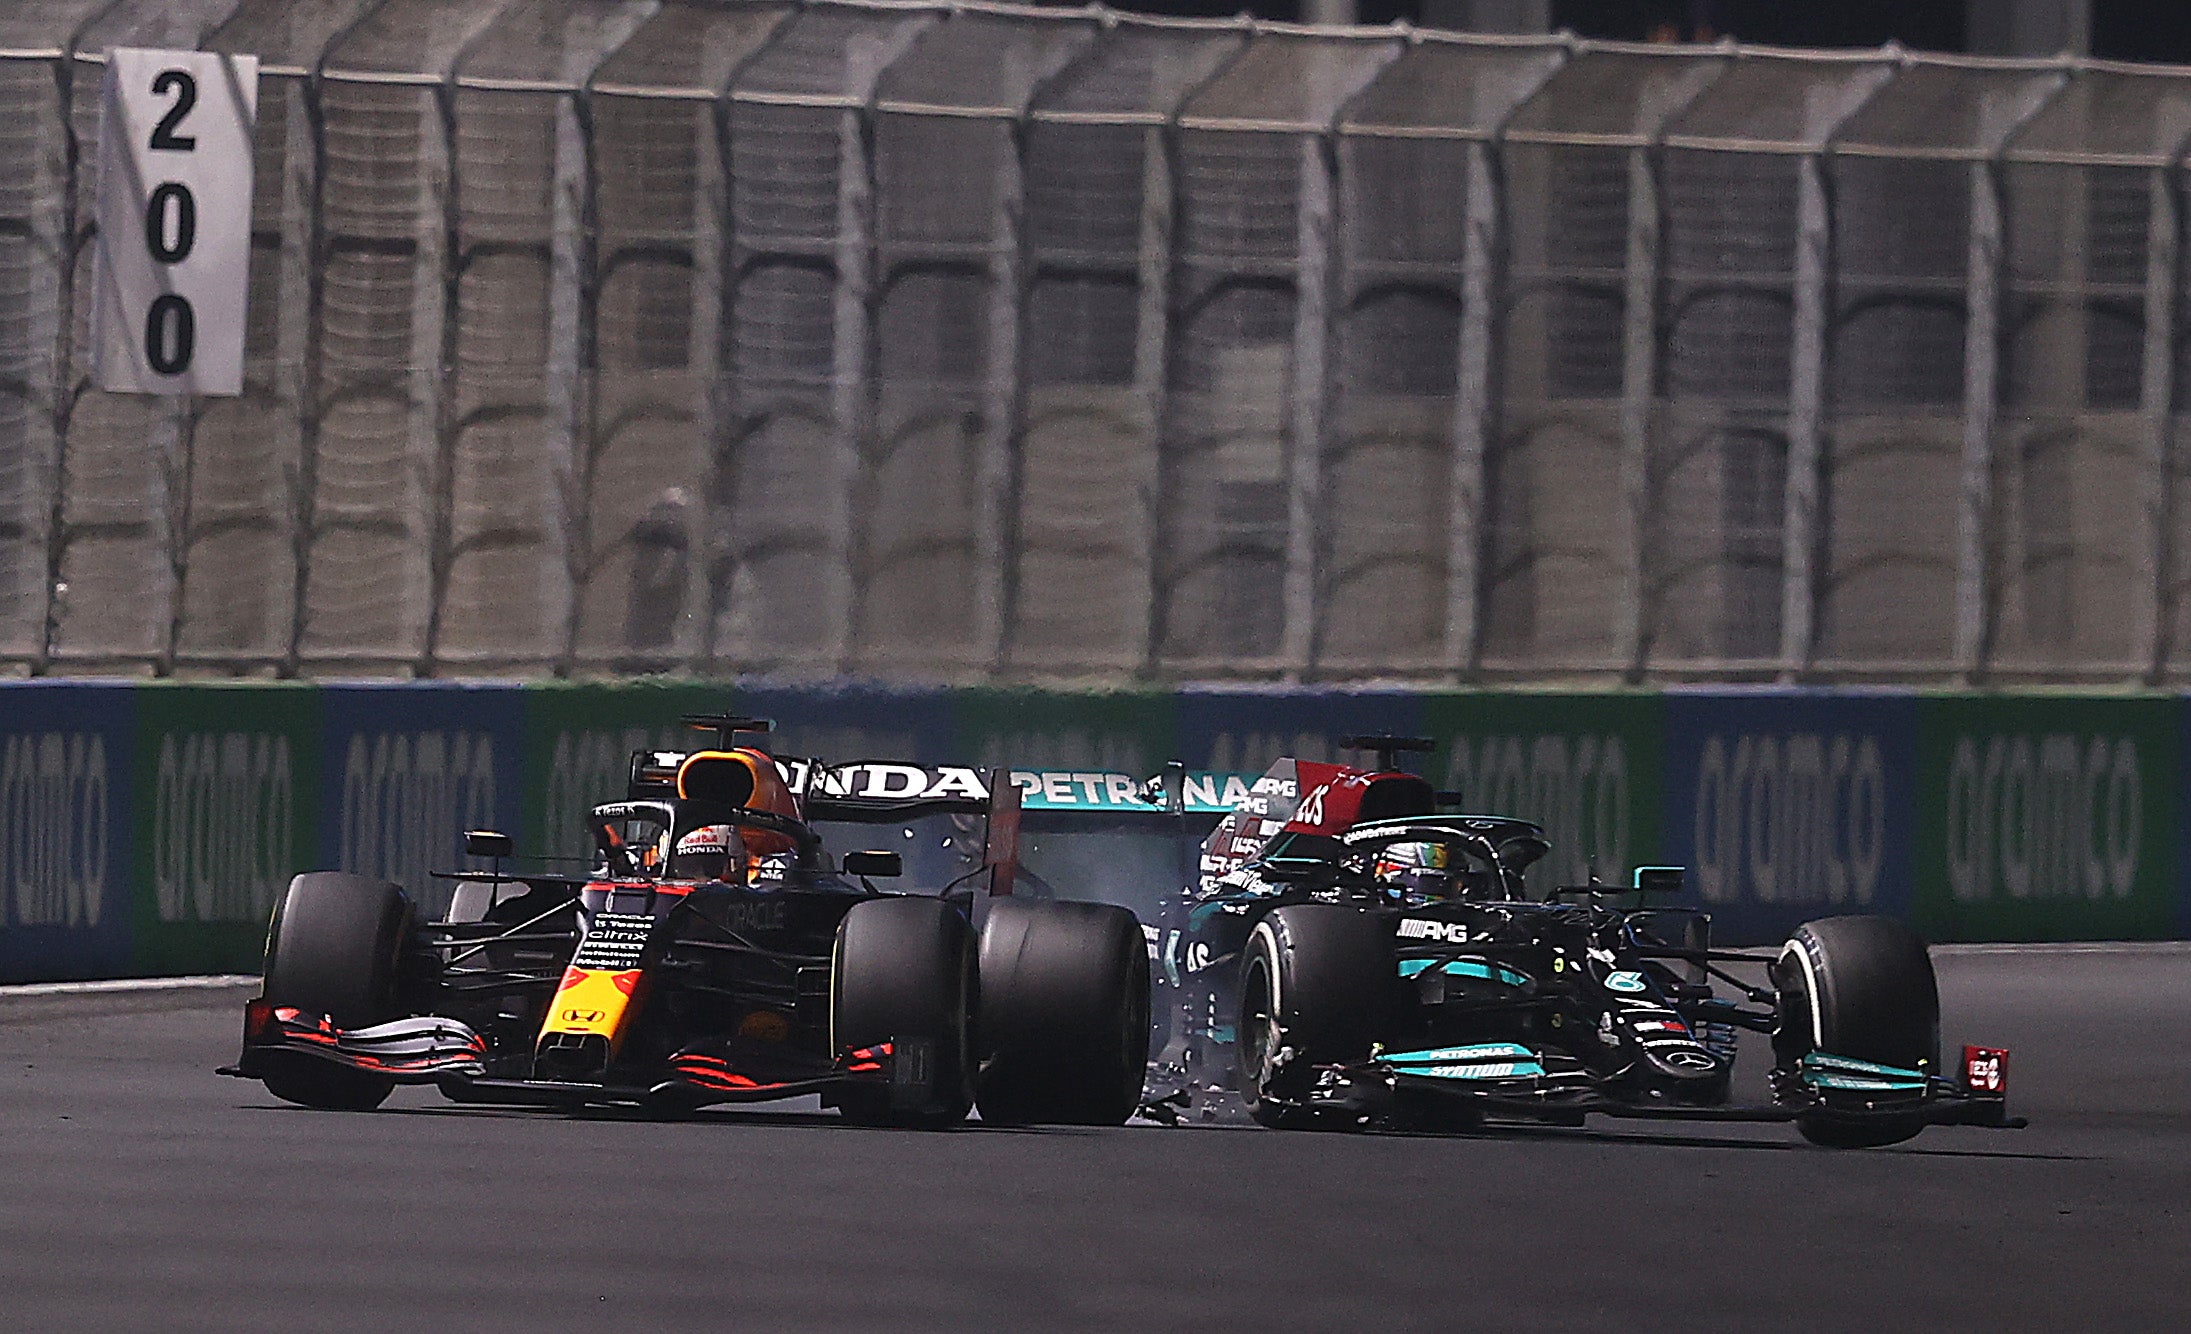 Max Verstappen and Lewis Hamilton collided during the 2021 Saudi Arabian Grand Prix